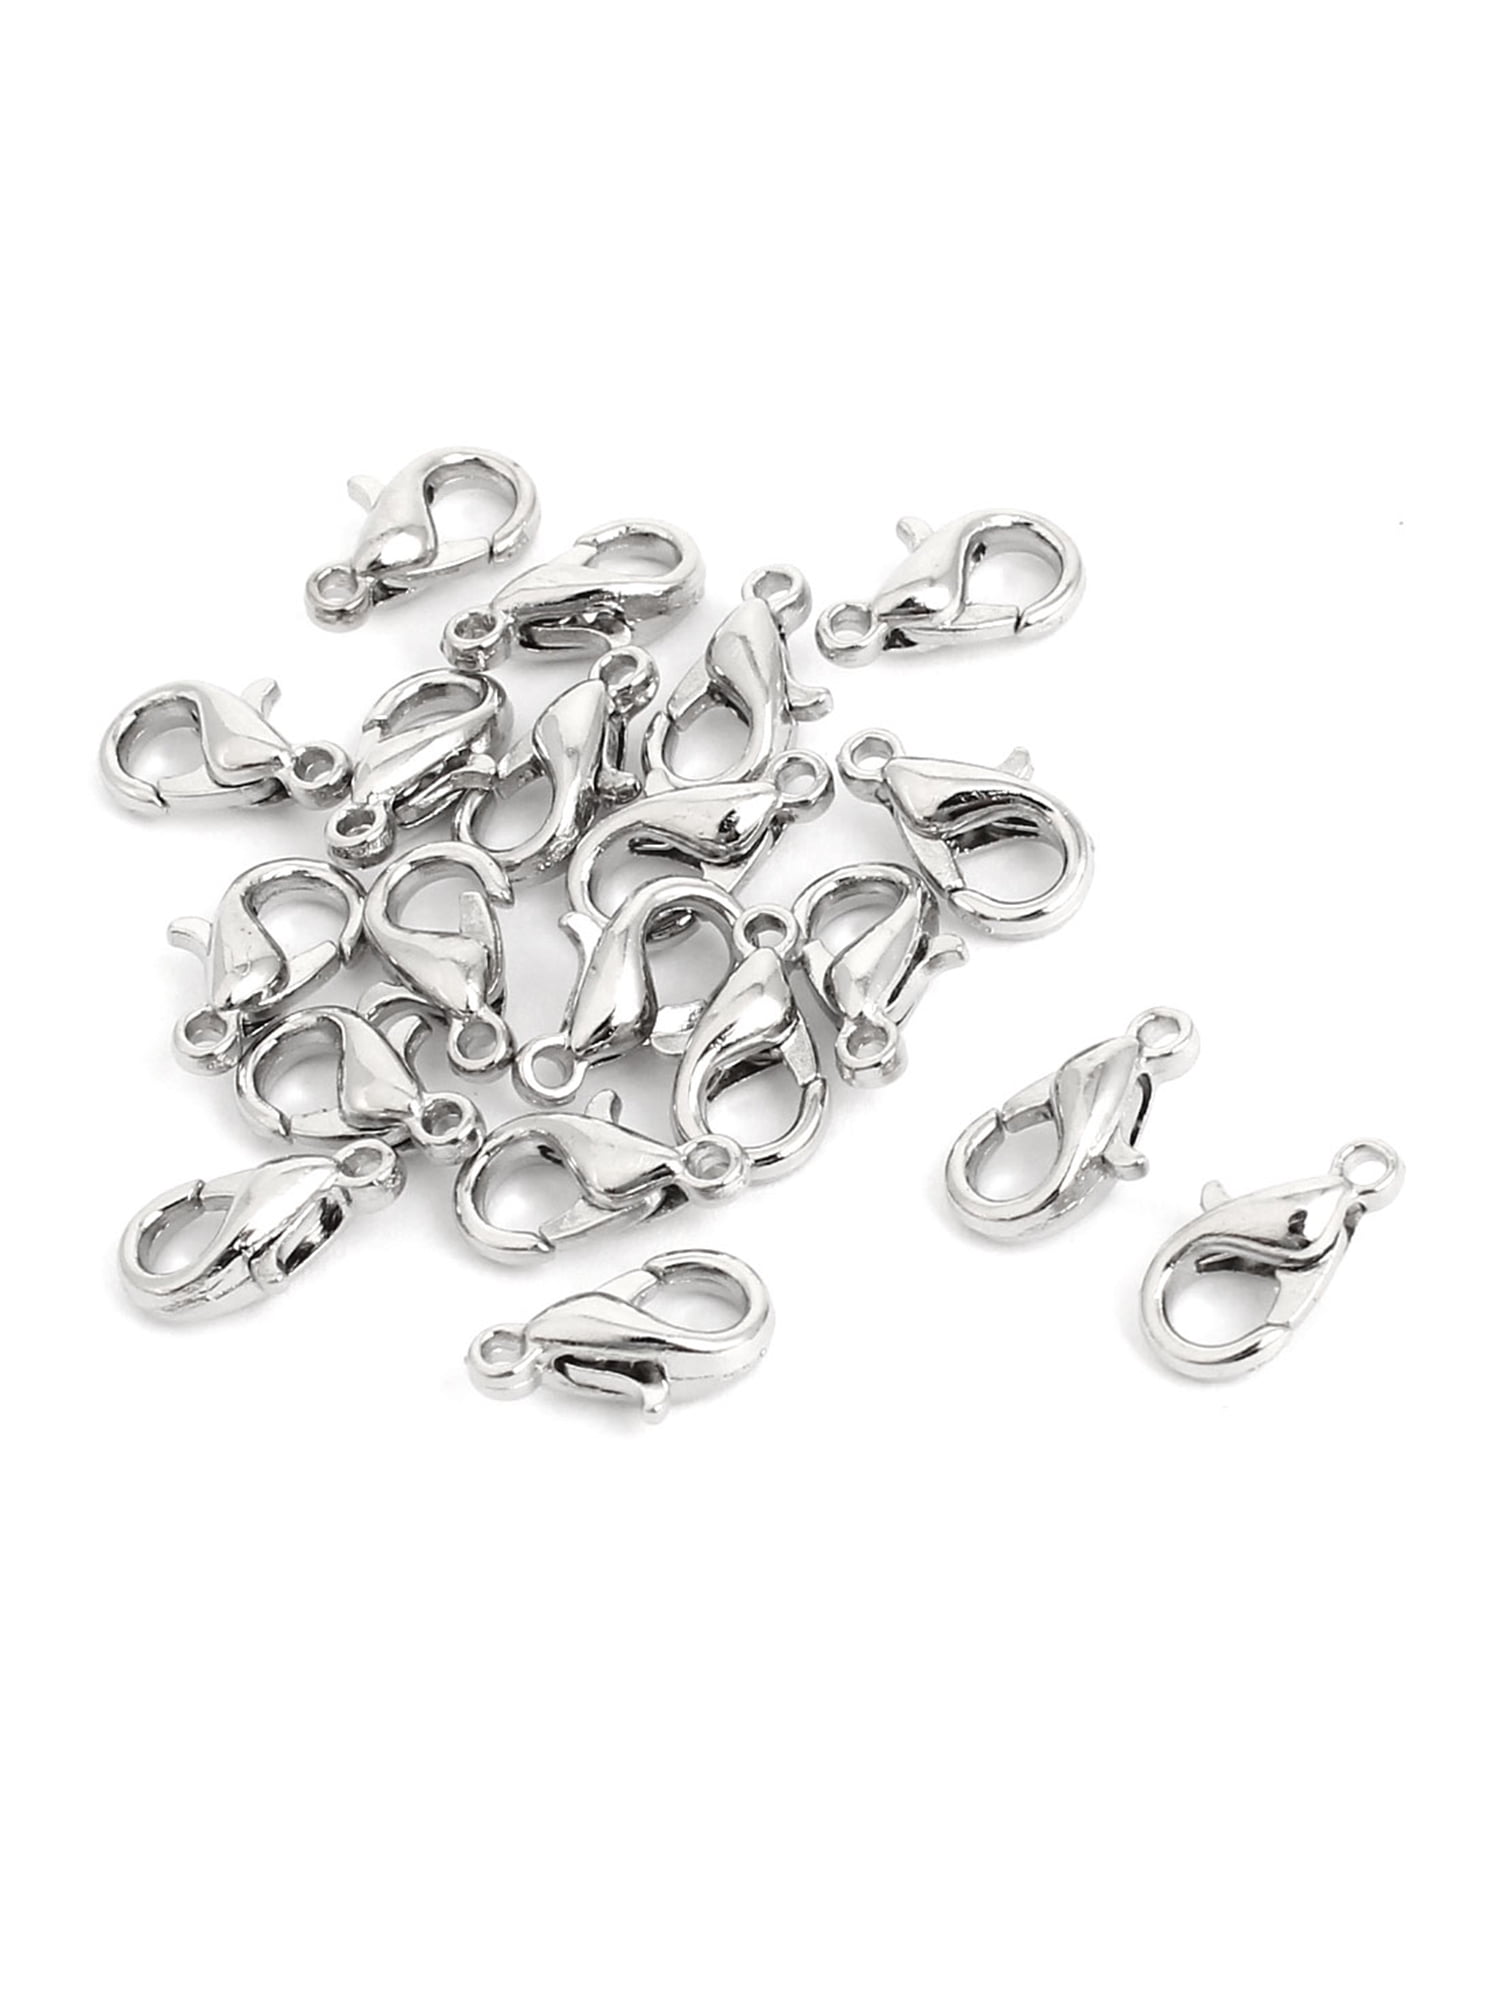 50 Silver Plated Lobster Claw Jewelry Findings Clasps 14x7mm Rockin Beads Brand 